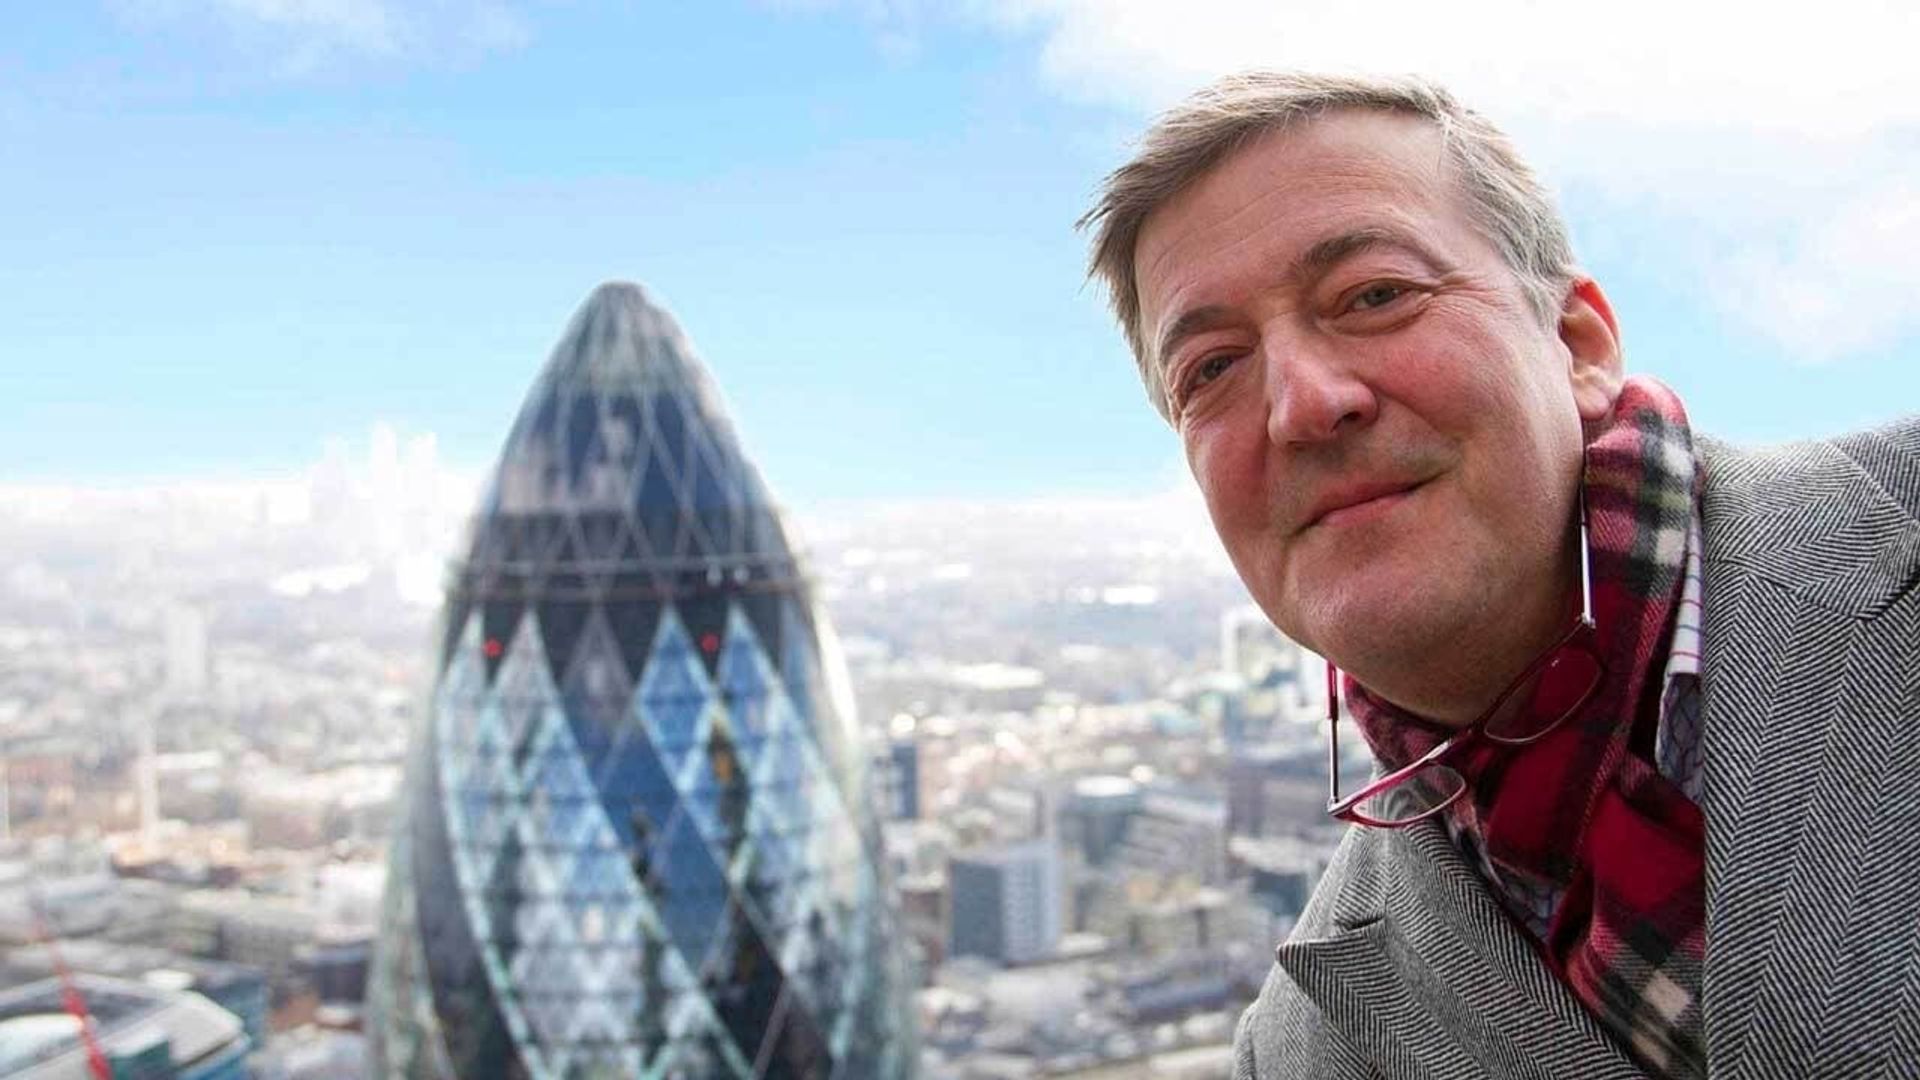 Stephen Fry's Key to the City background